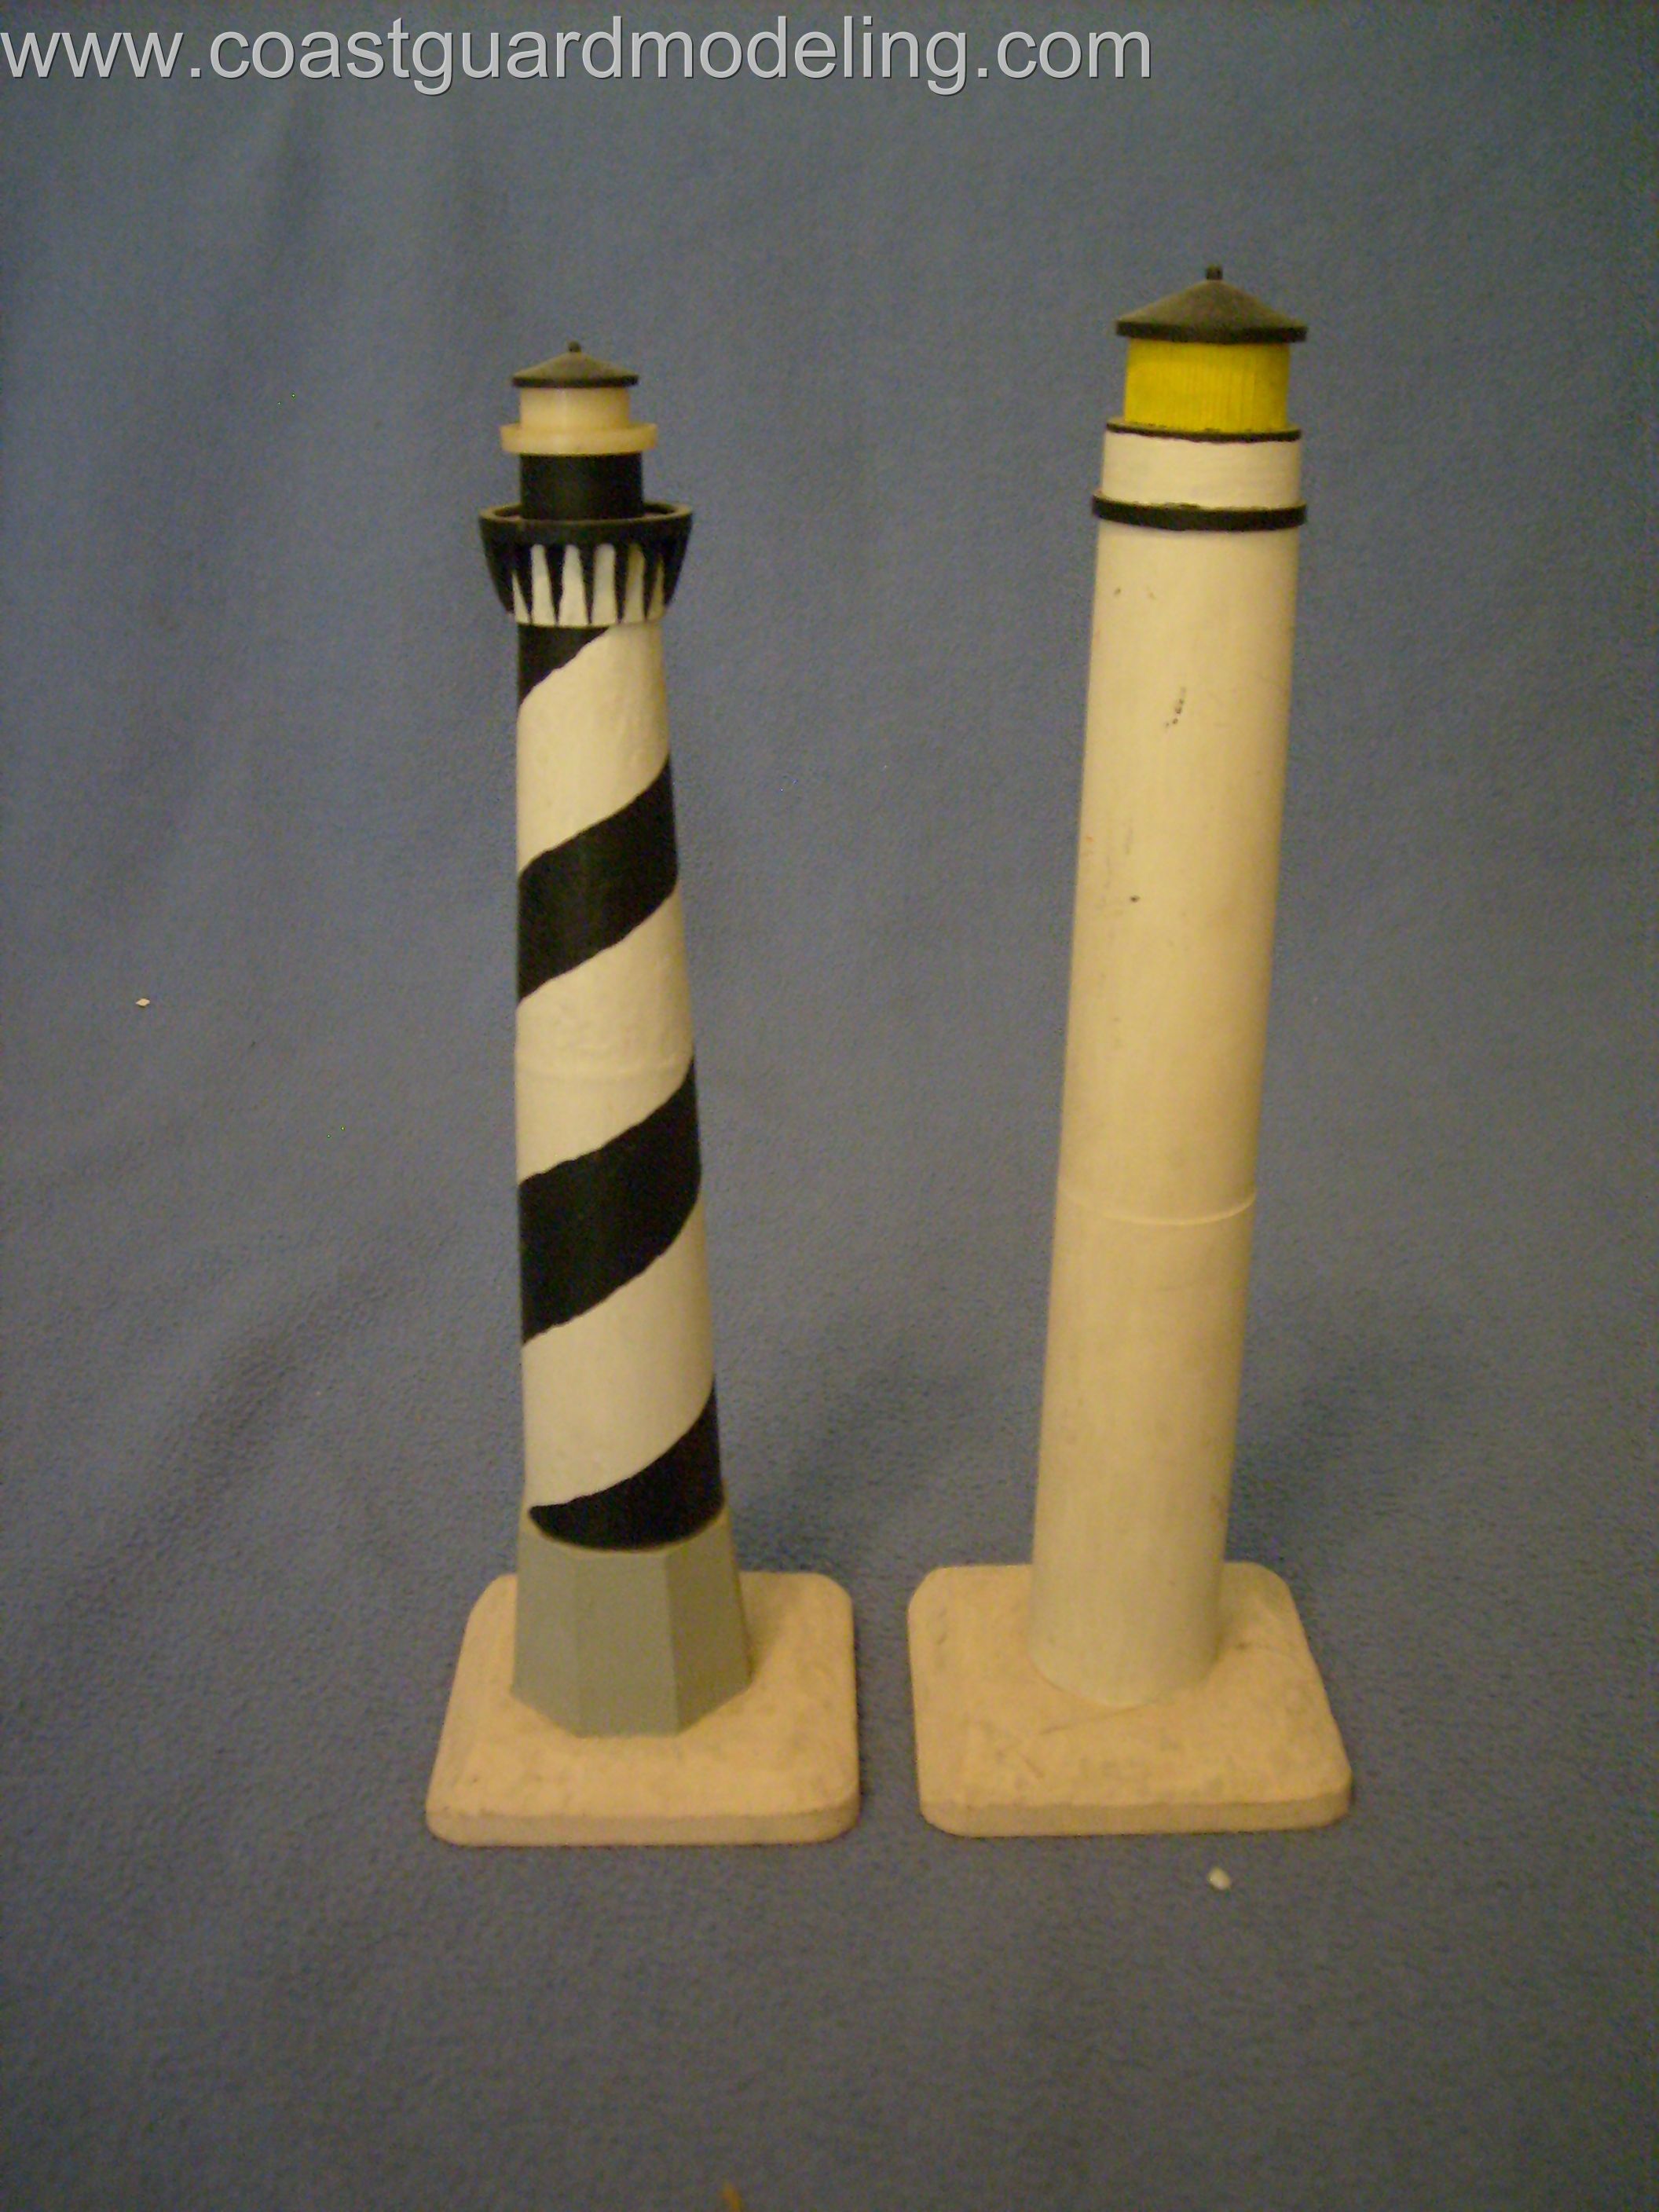 Cape Hatteras and Boston Lighthouses